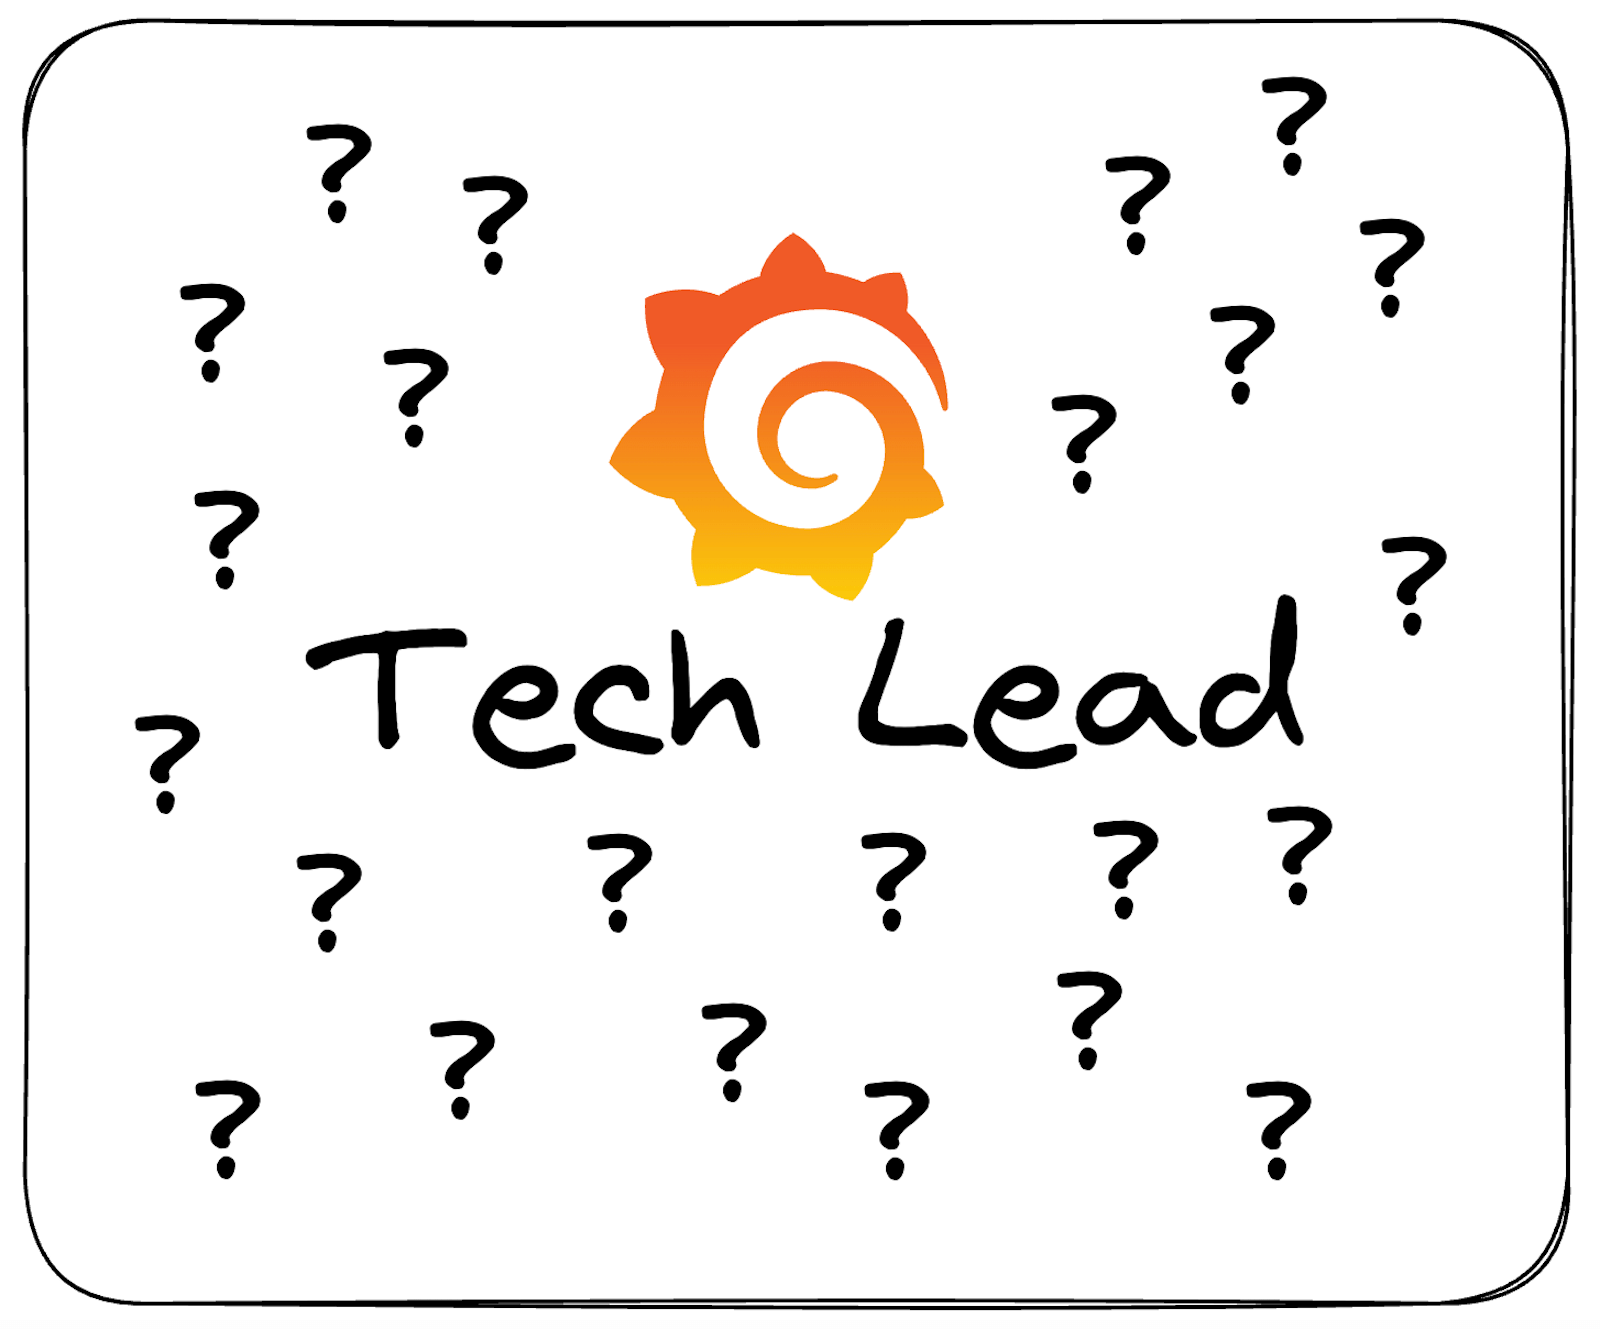 An image of a Grafana Labs logo surrounded by the words 'Tech Lead' and question marks